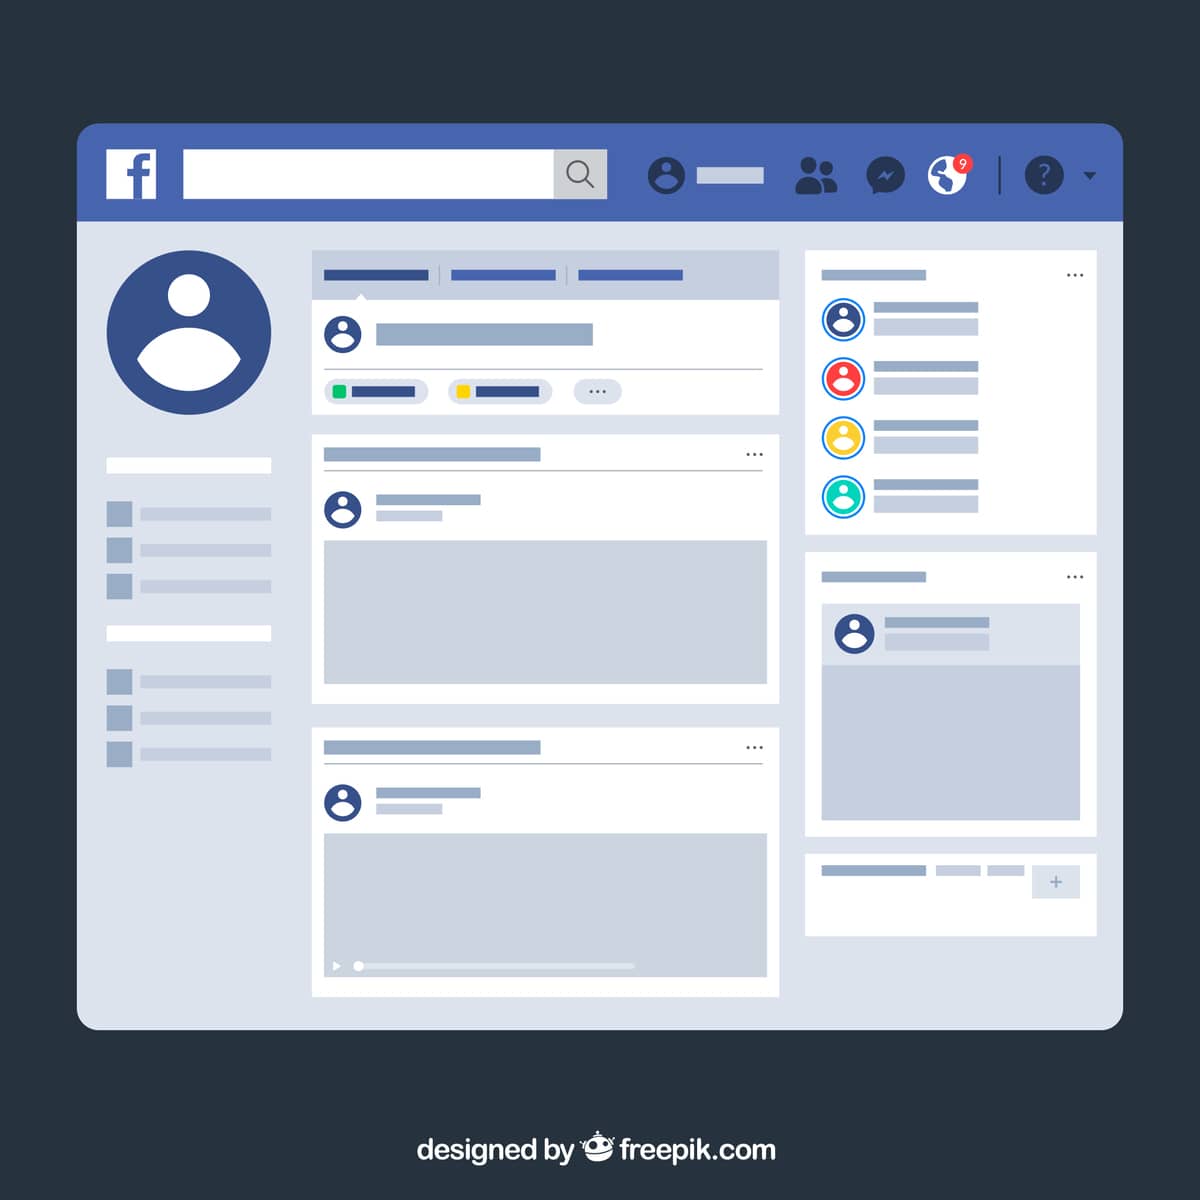 Facebook Page for Your Business